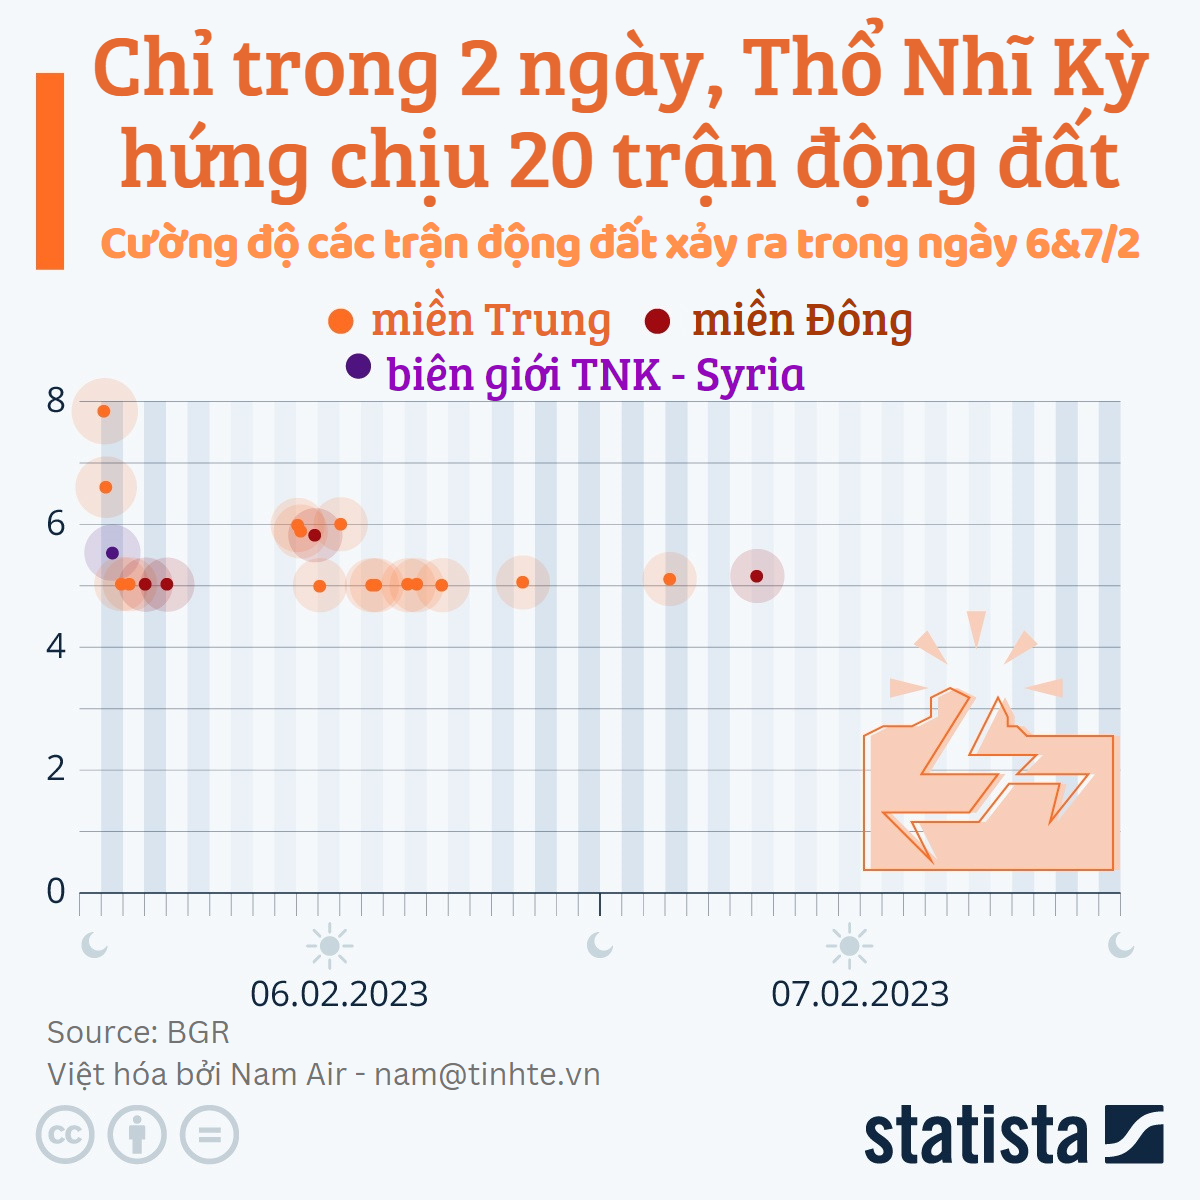 tinhte-dong-dat-tho-nhi-ky.png